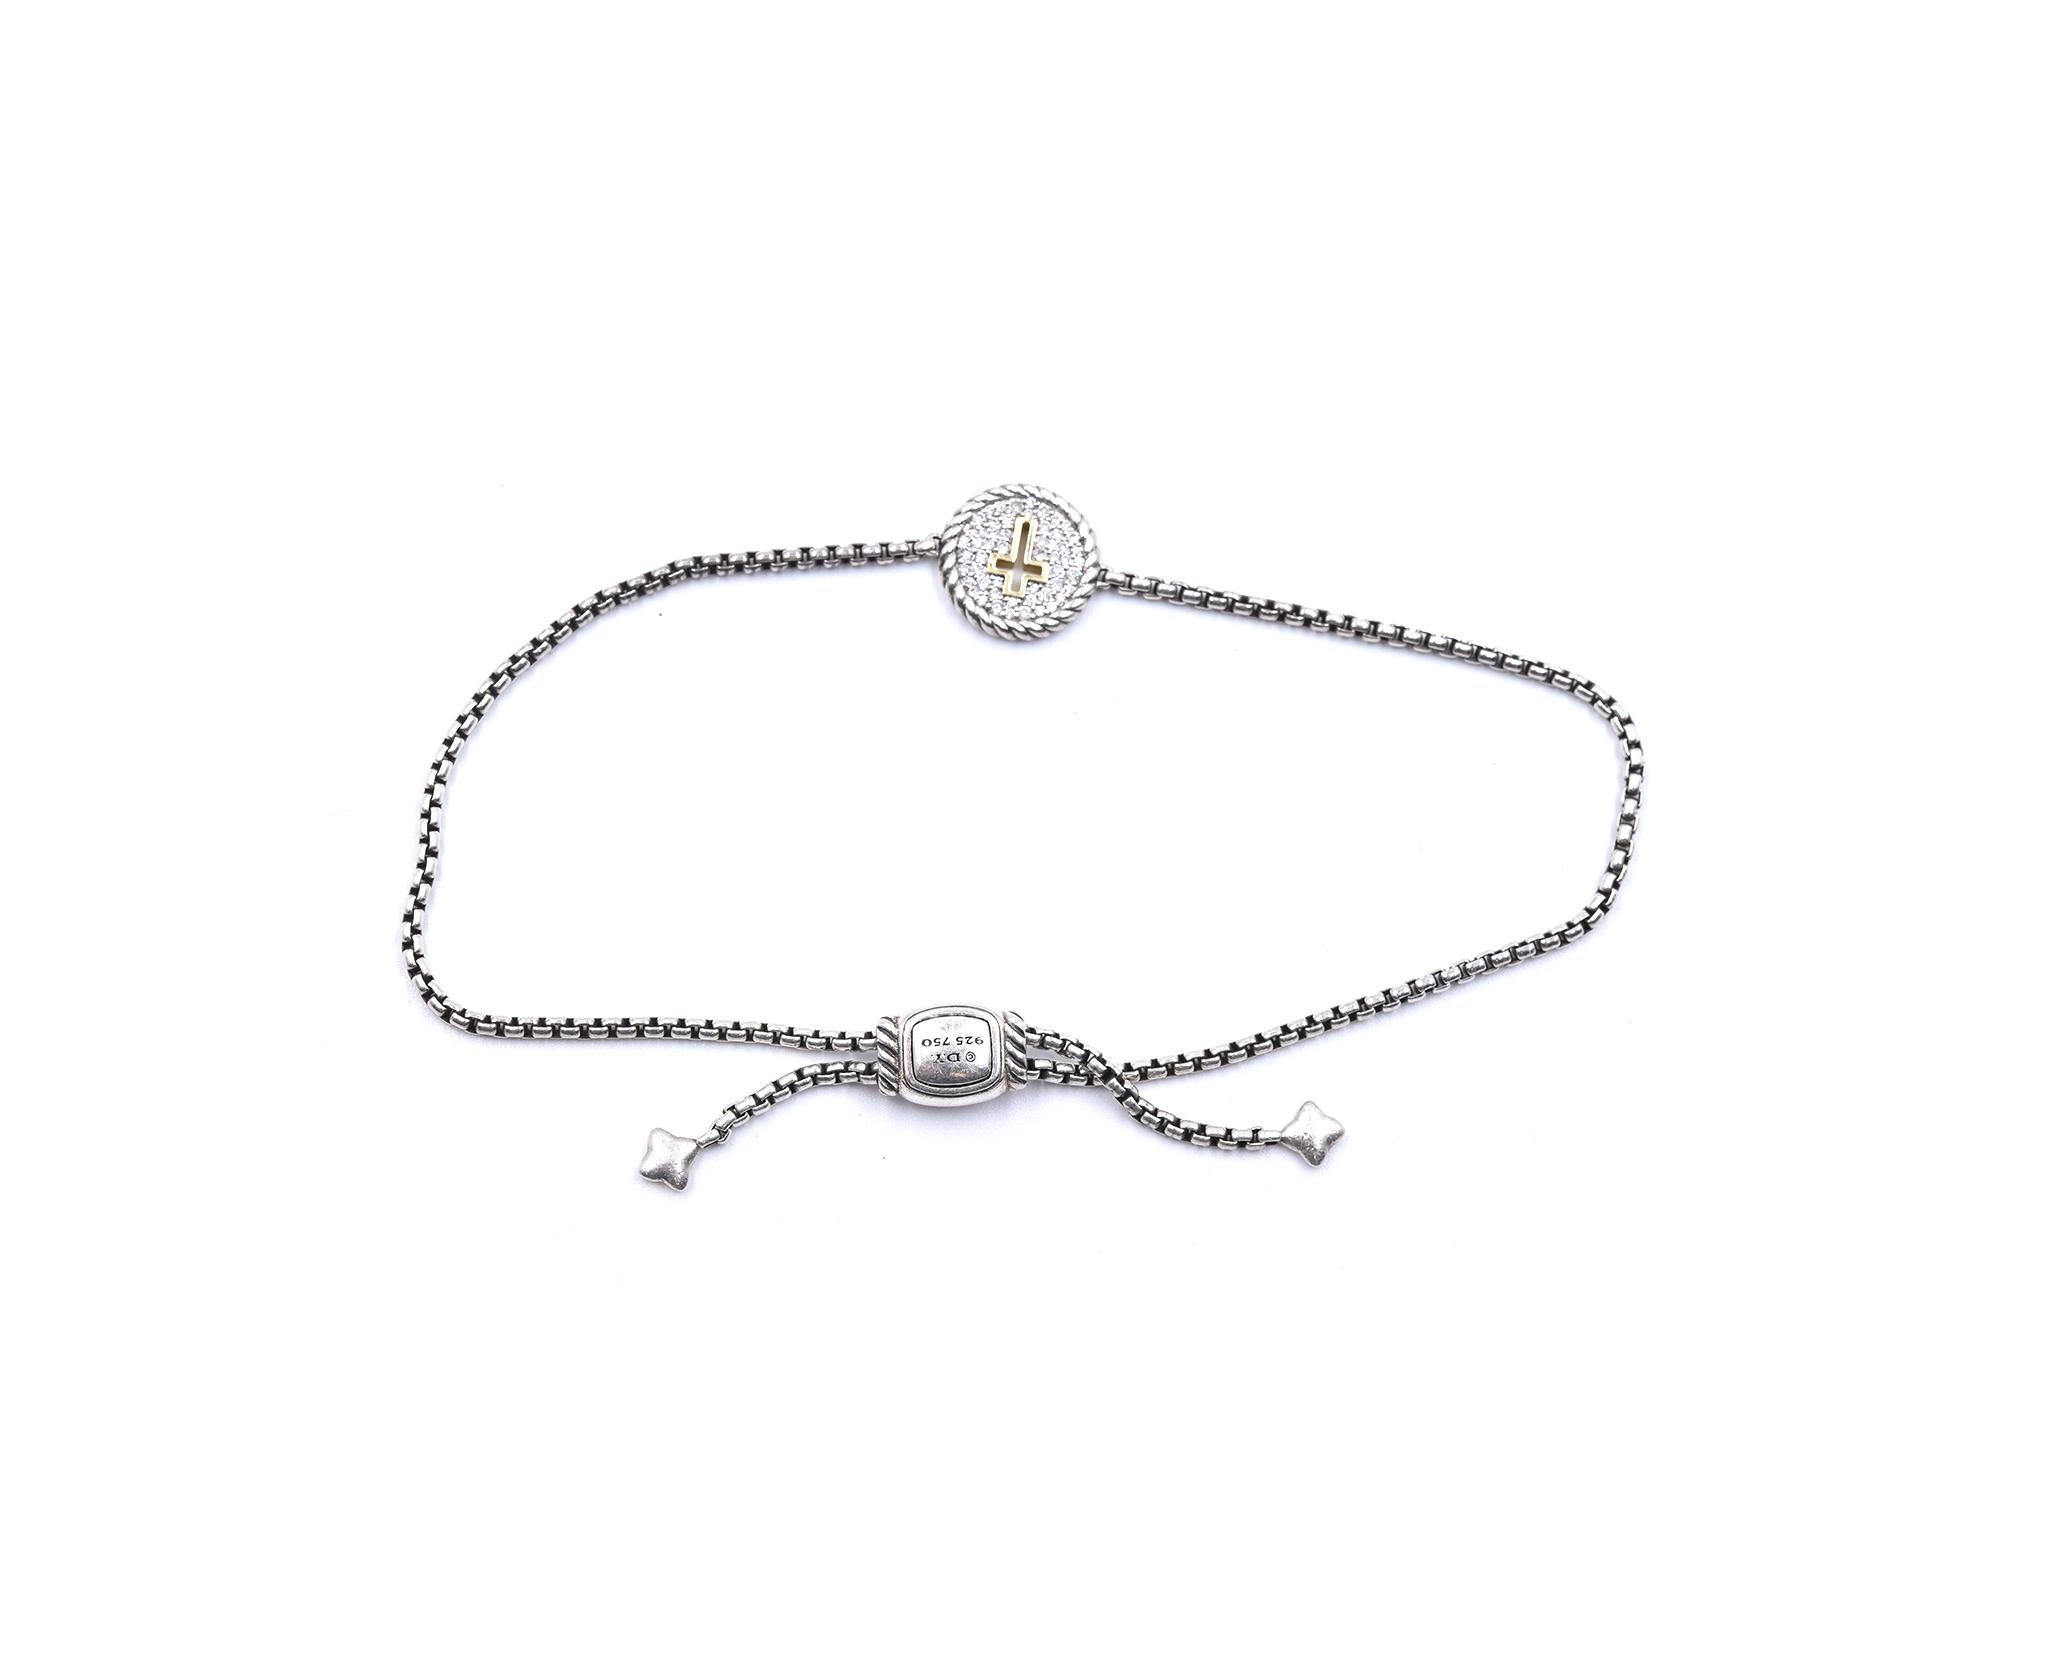 Designer: David Yurman
Material: 18KY/sterling silver 
Diamond:  round cut = .18cttw
Color: G
Clarity: VS2
Weight: 6.71 grams
